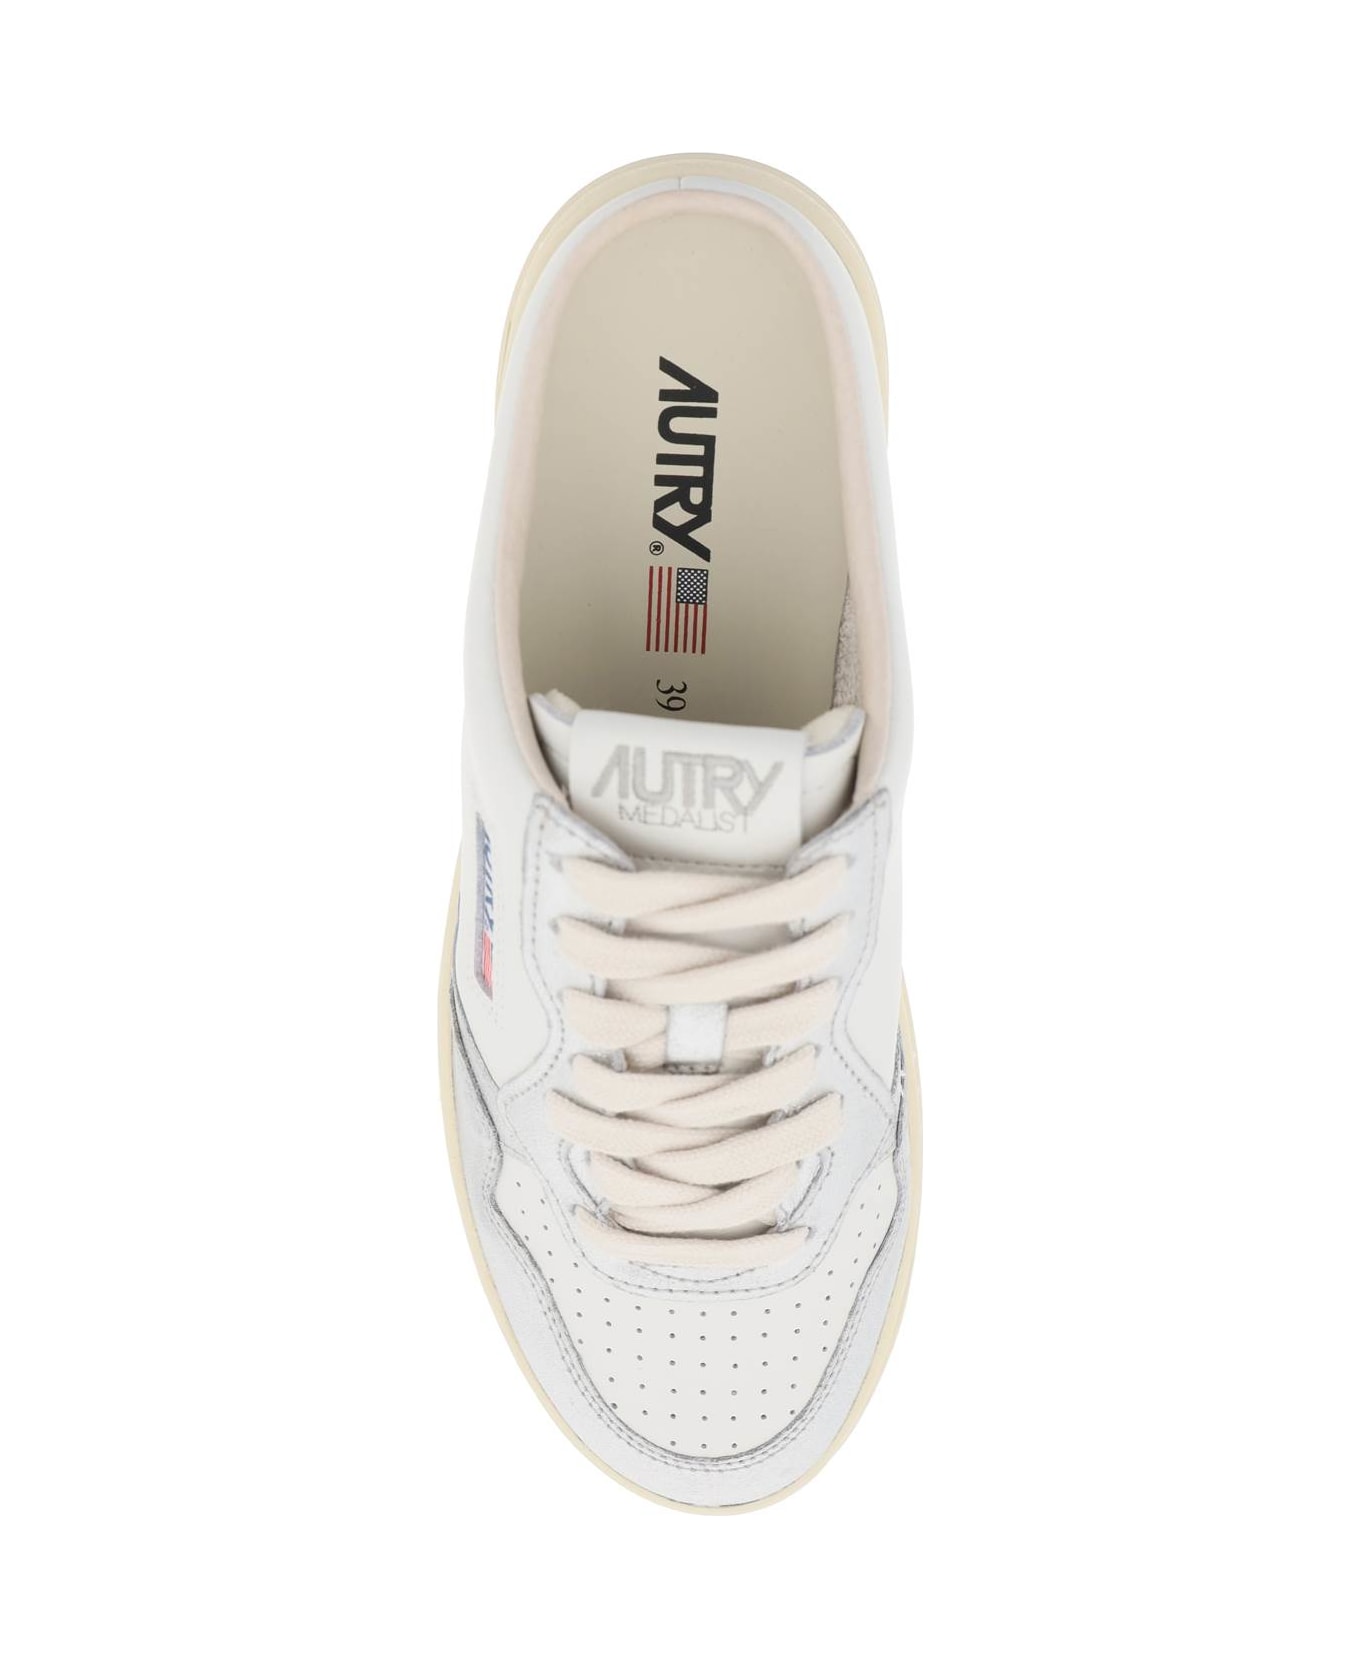 Autry Medalist Mule Low Sneakers - WHITE SILVER (Silver)